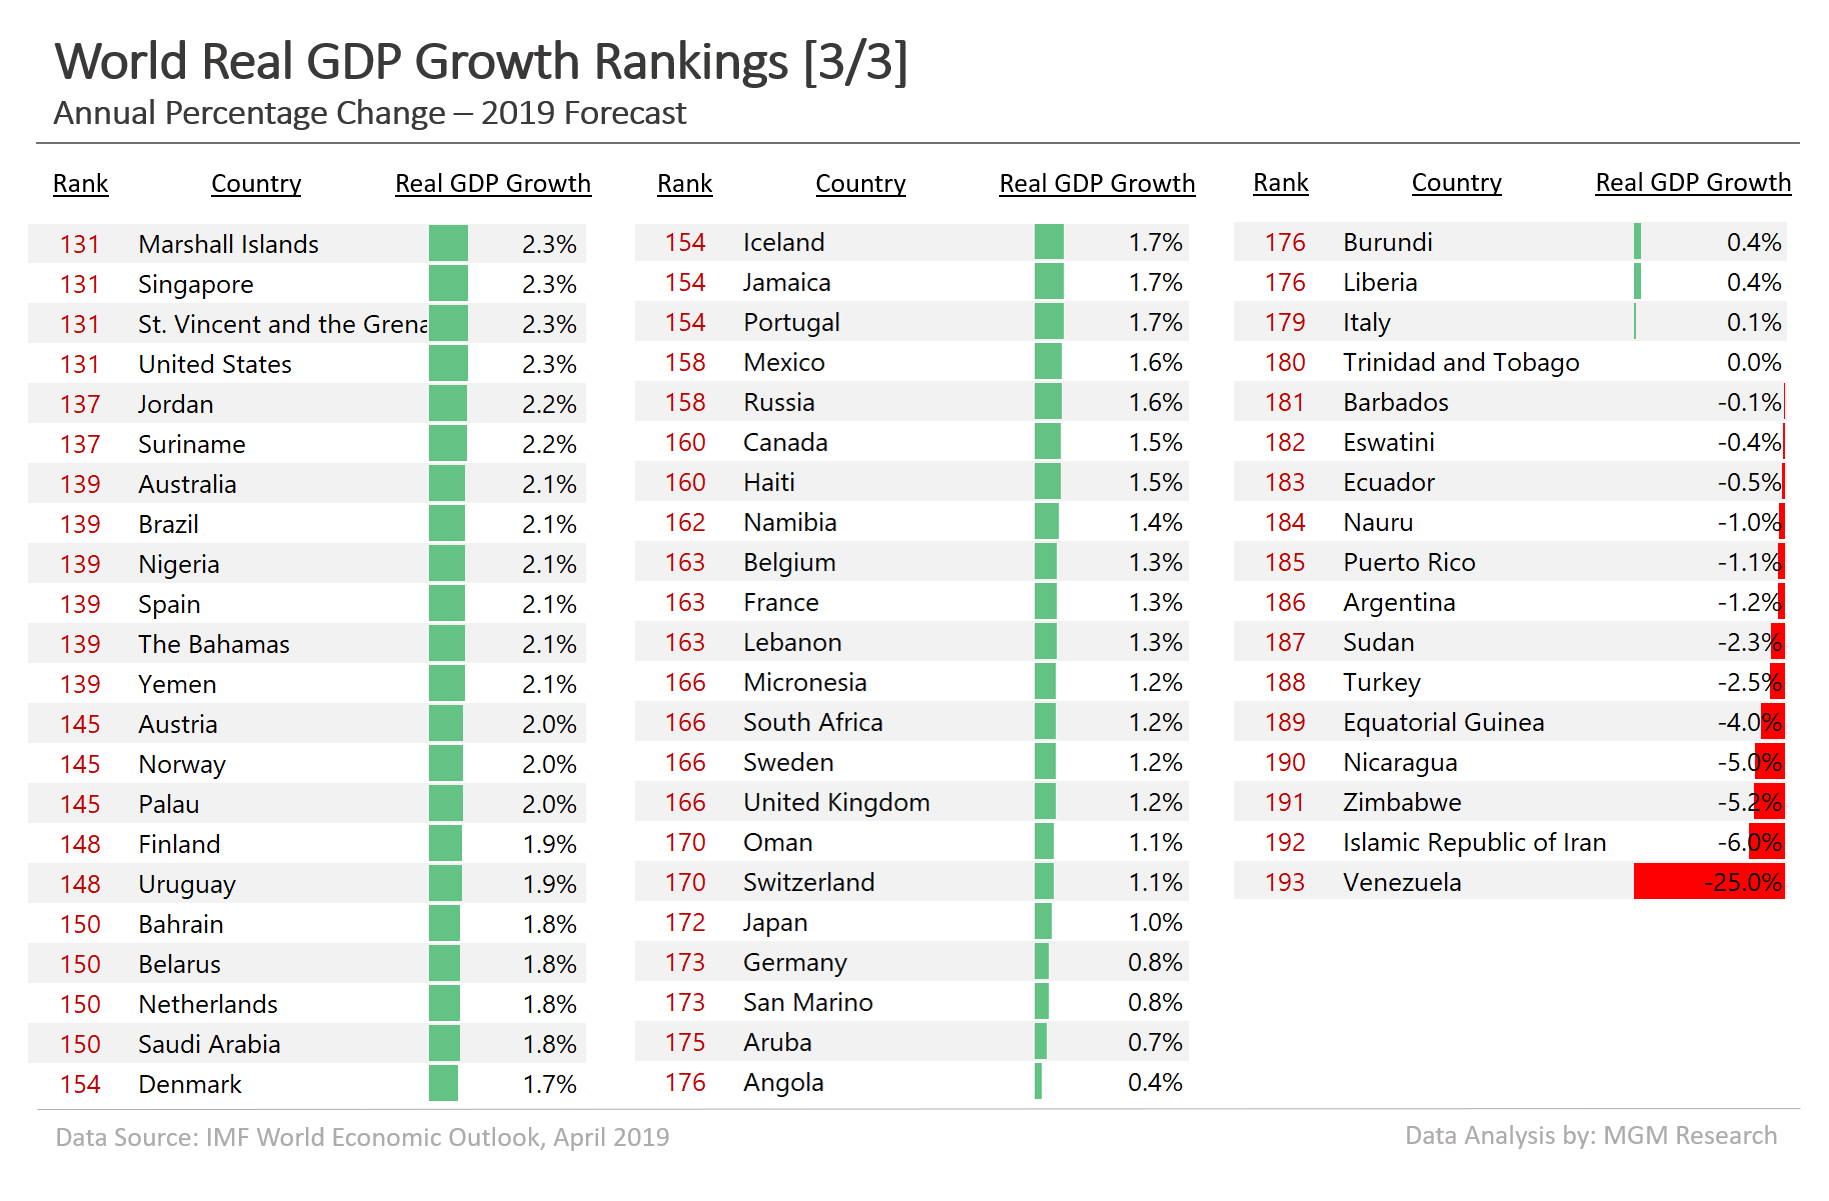 World real GDP growth rankings 2019 - 3 of 3